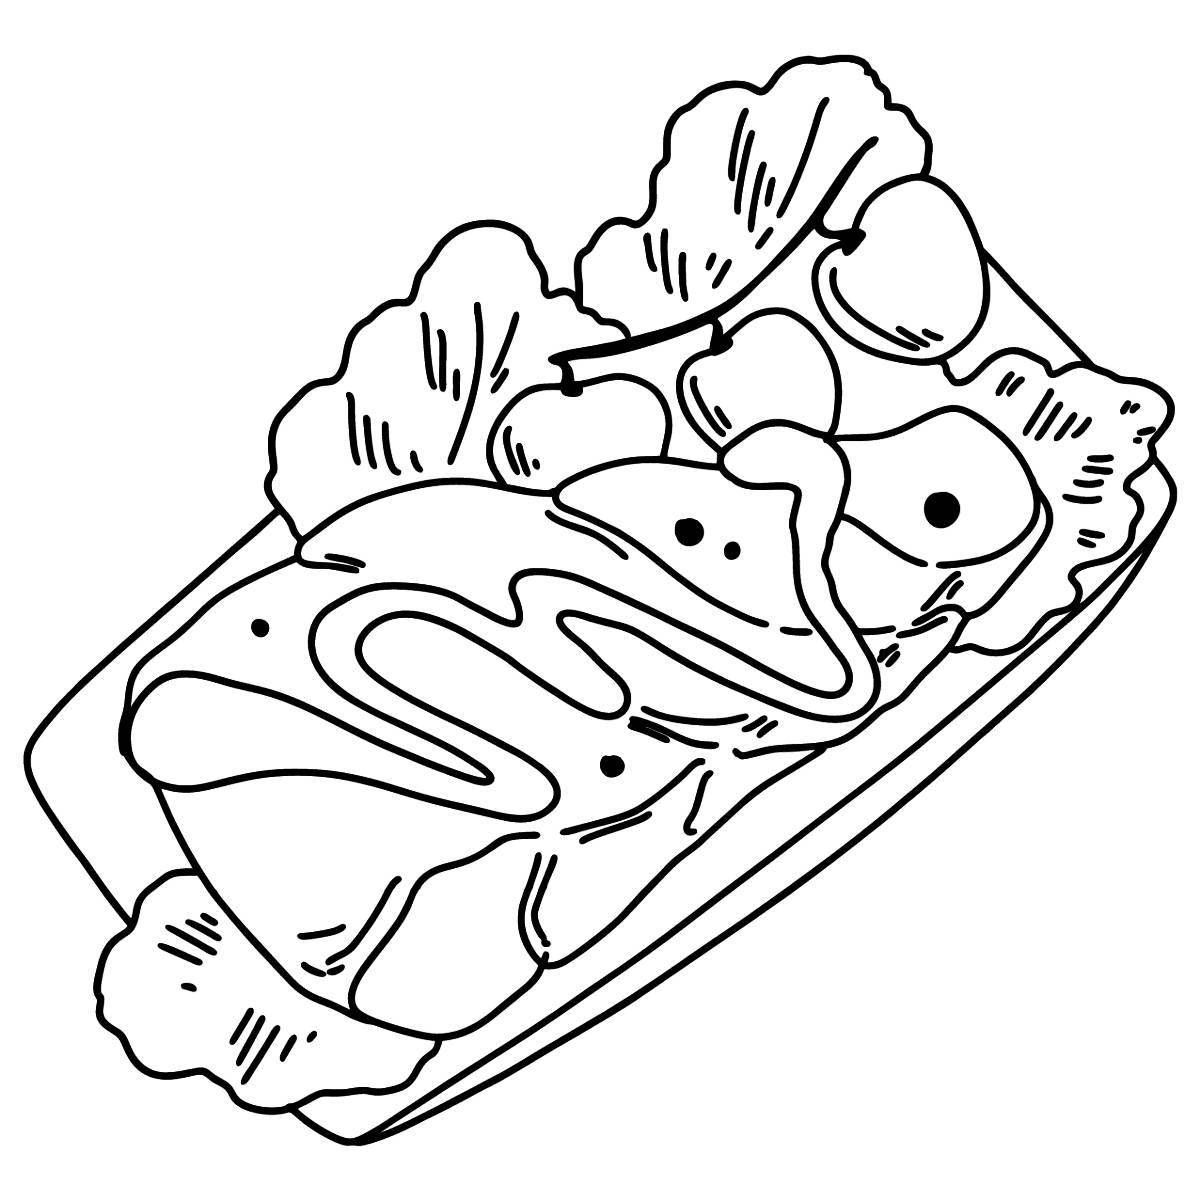 Nutritious salad coloring page for kids